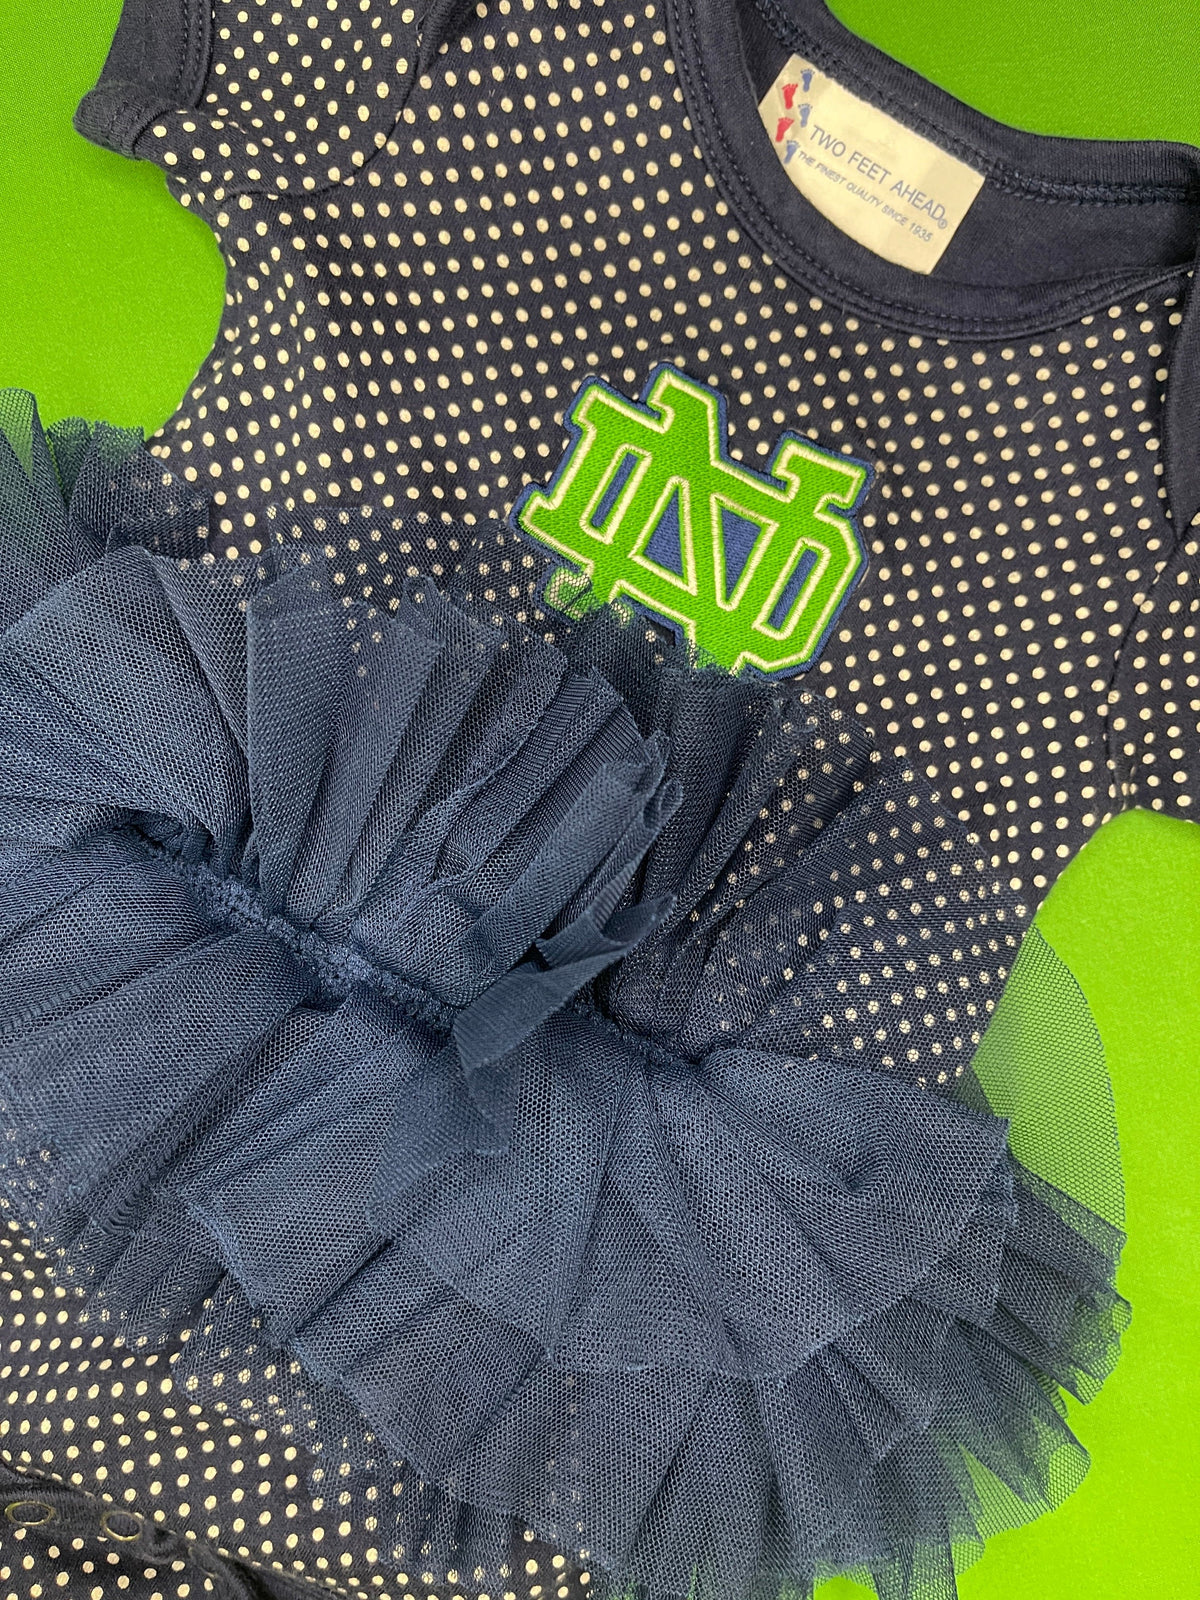 NCAA Notre Dame Fighting Irish Baby Tutu Outfit 6 Months